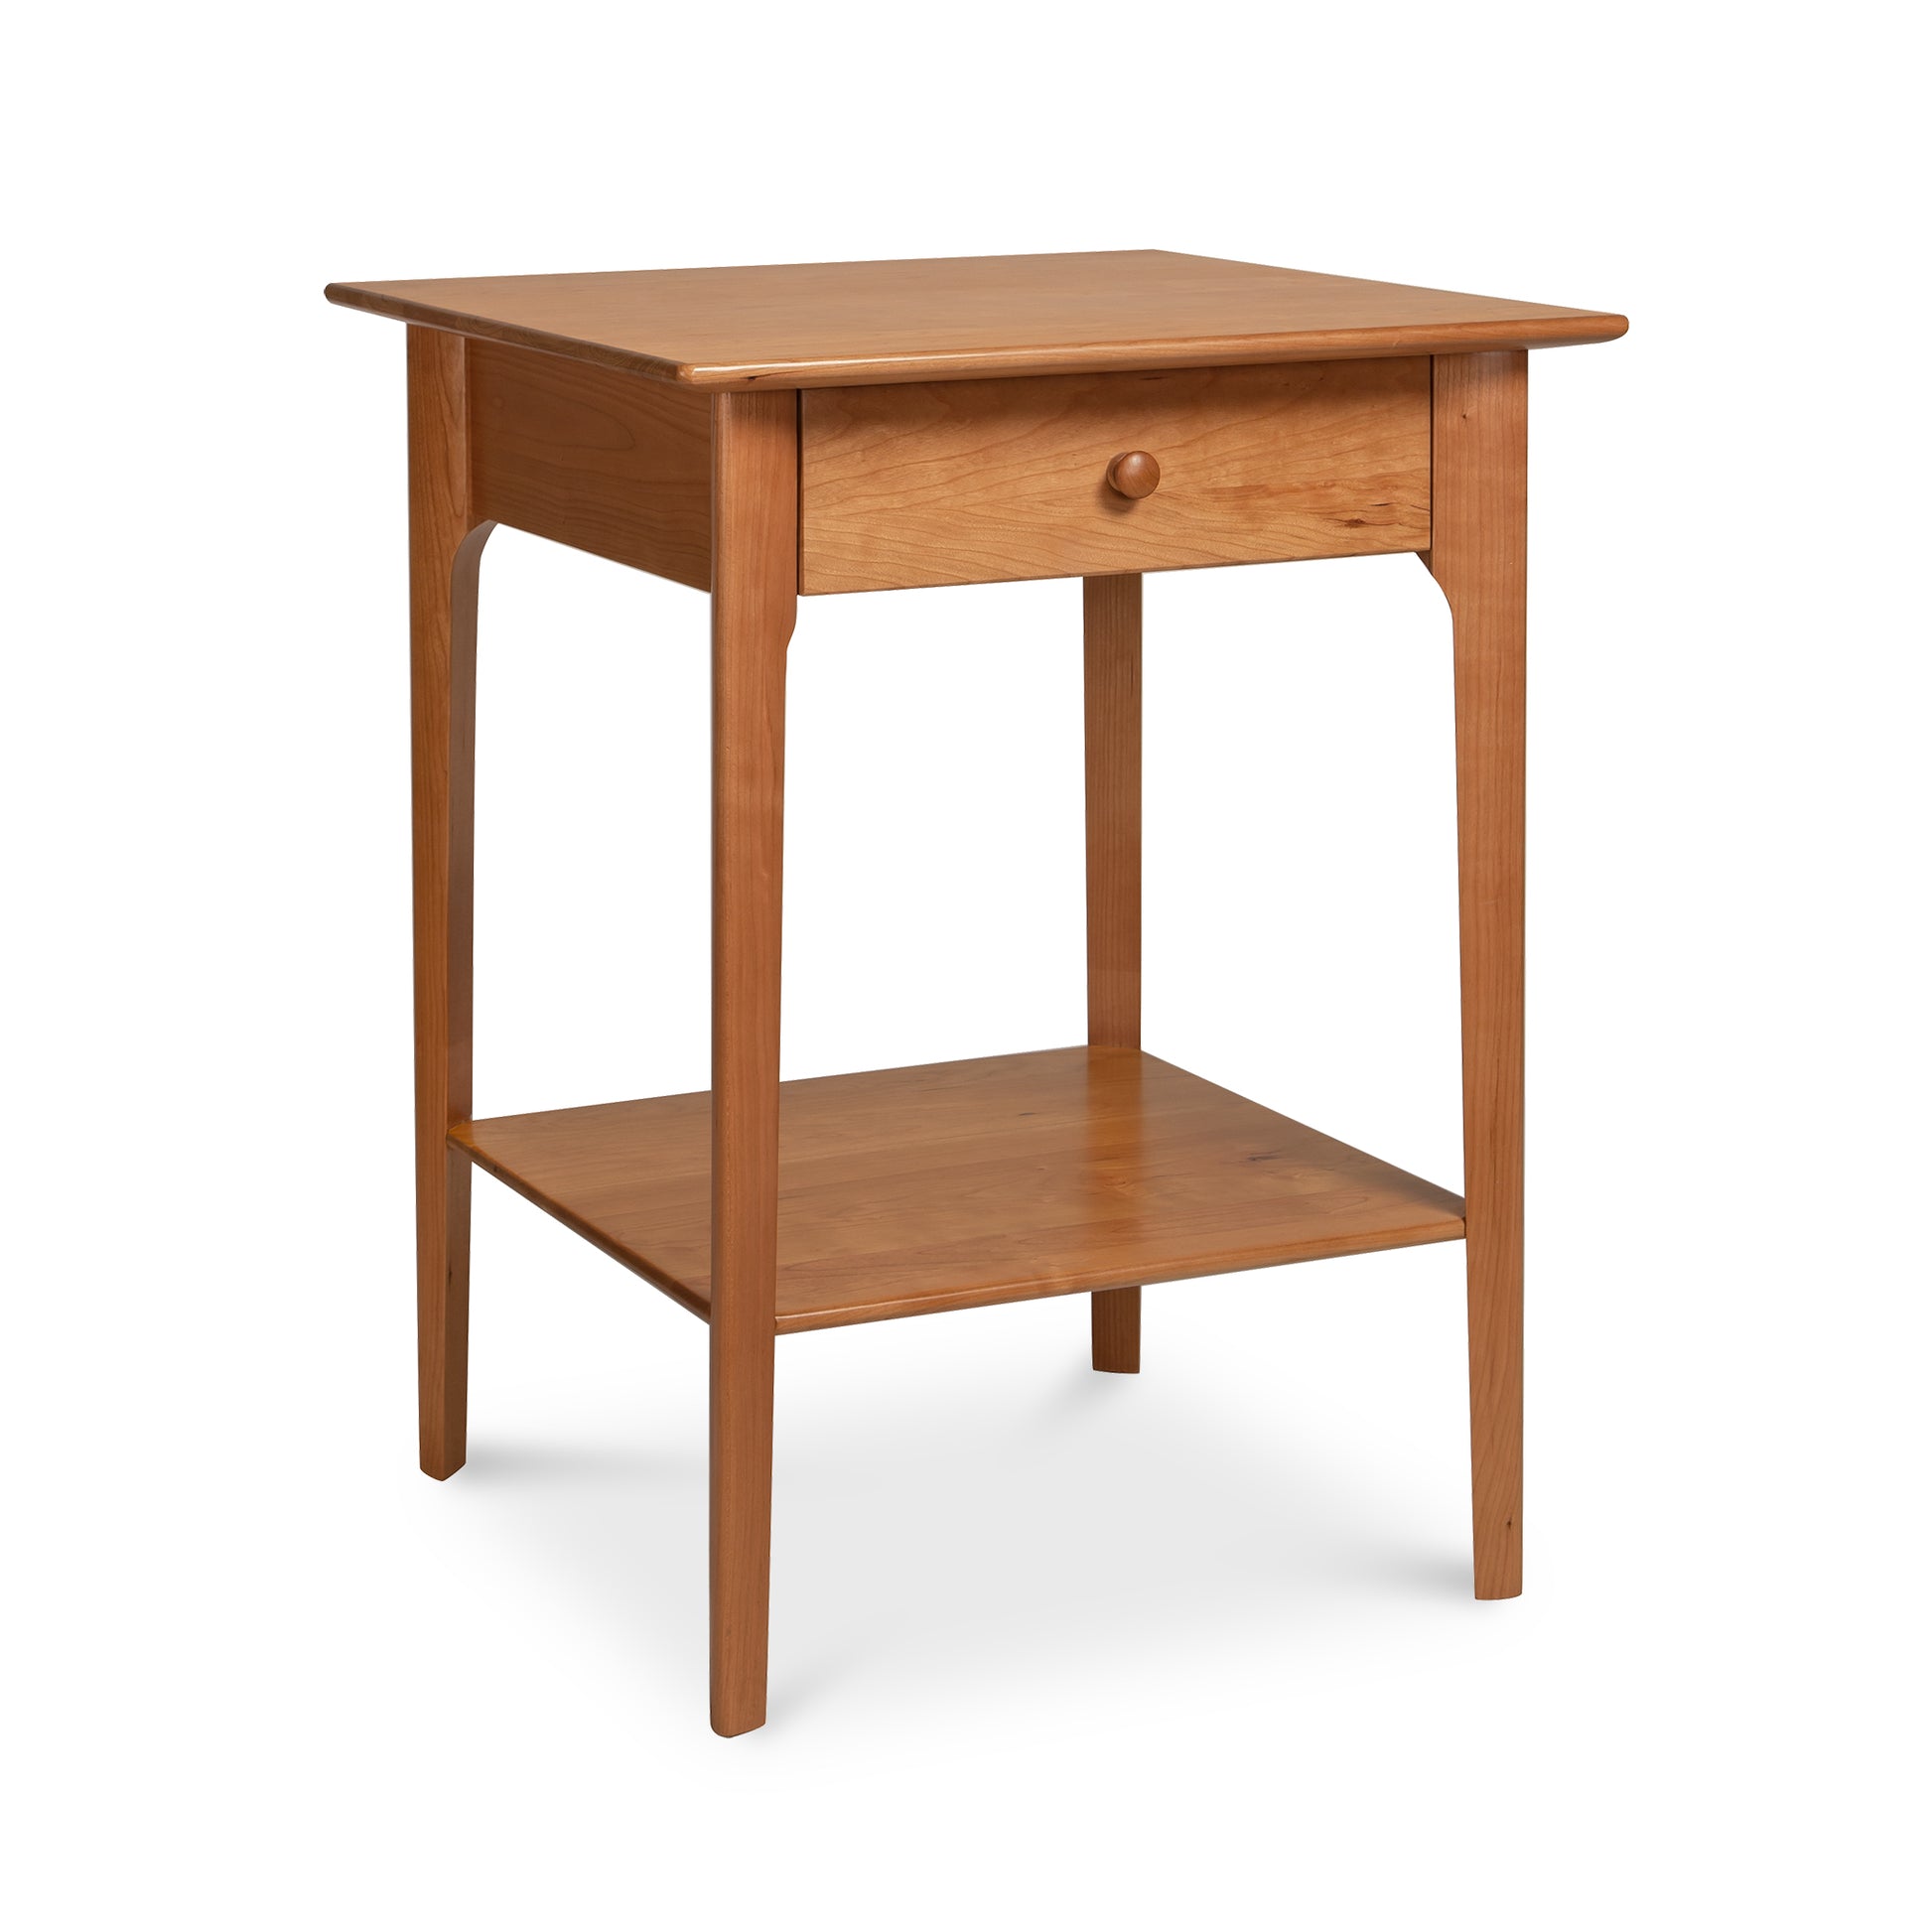 Shaker-style Sarah 1-Drawer Open Shelf Nightstand by Copeland Furniture, with a solid wood drawer and lower shelf, isolated on a white background.